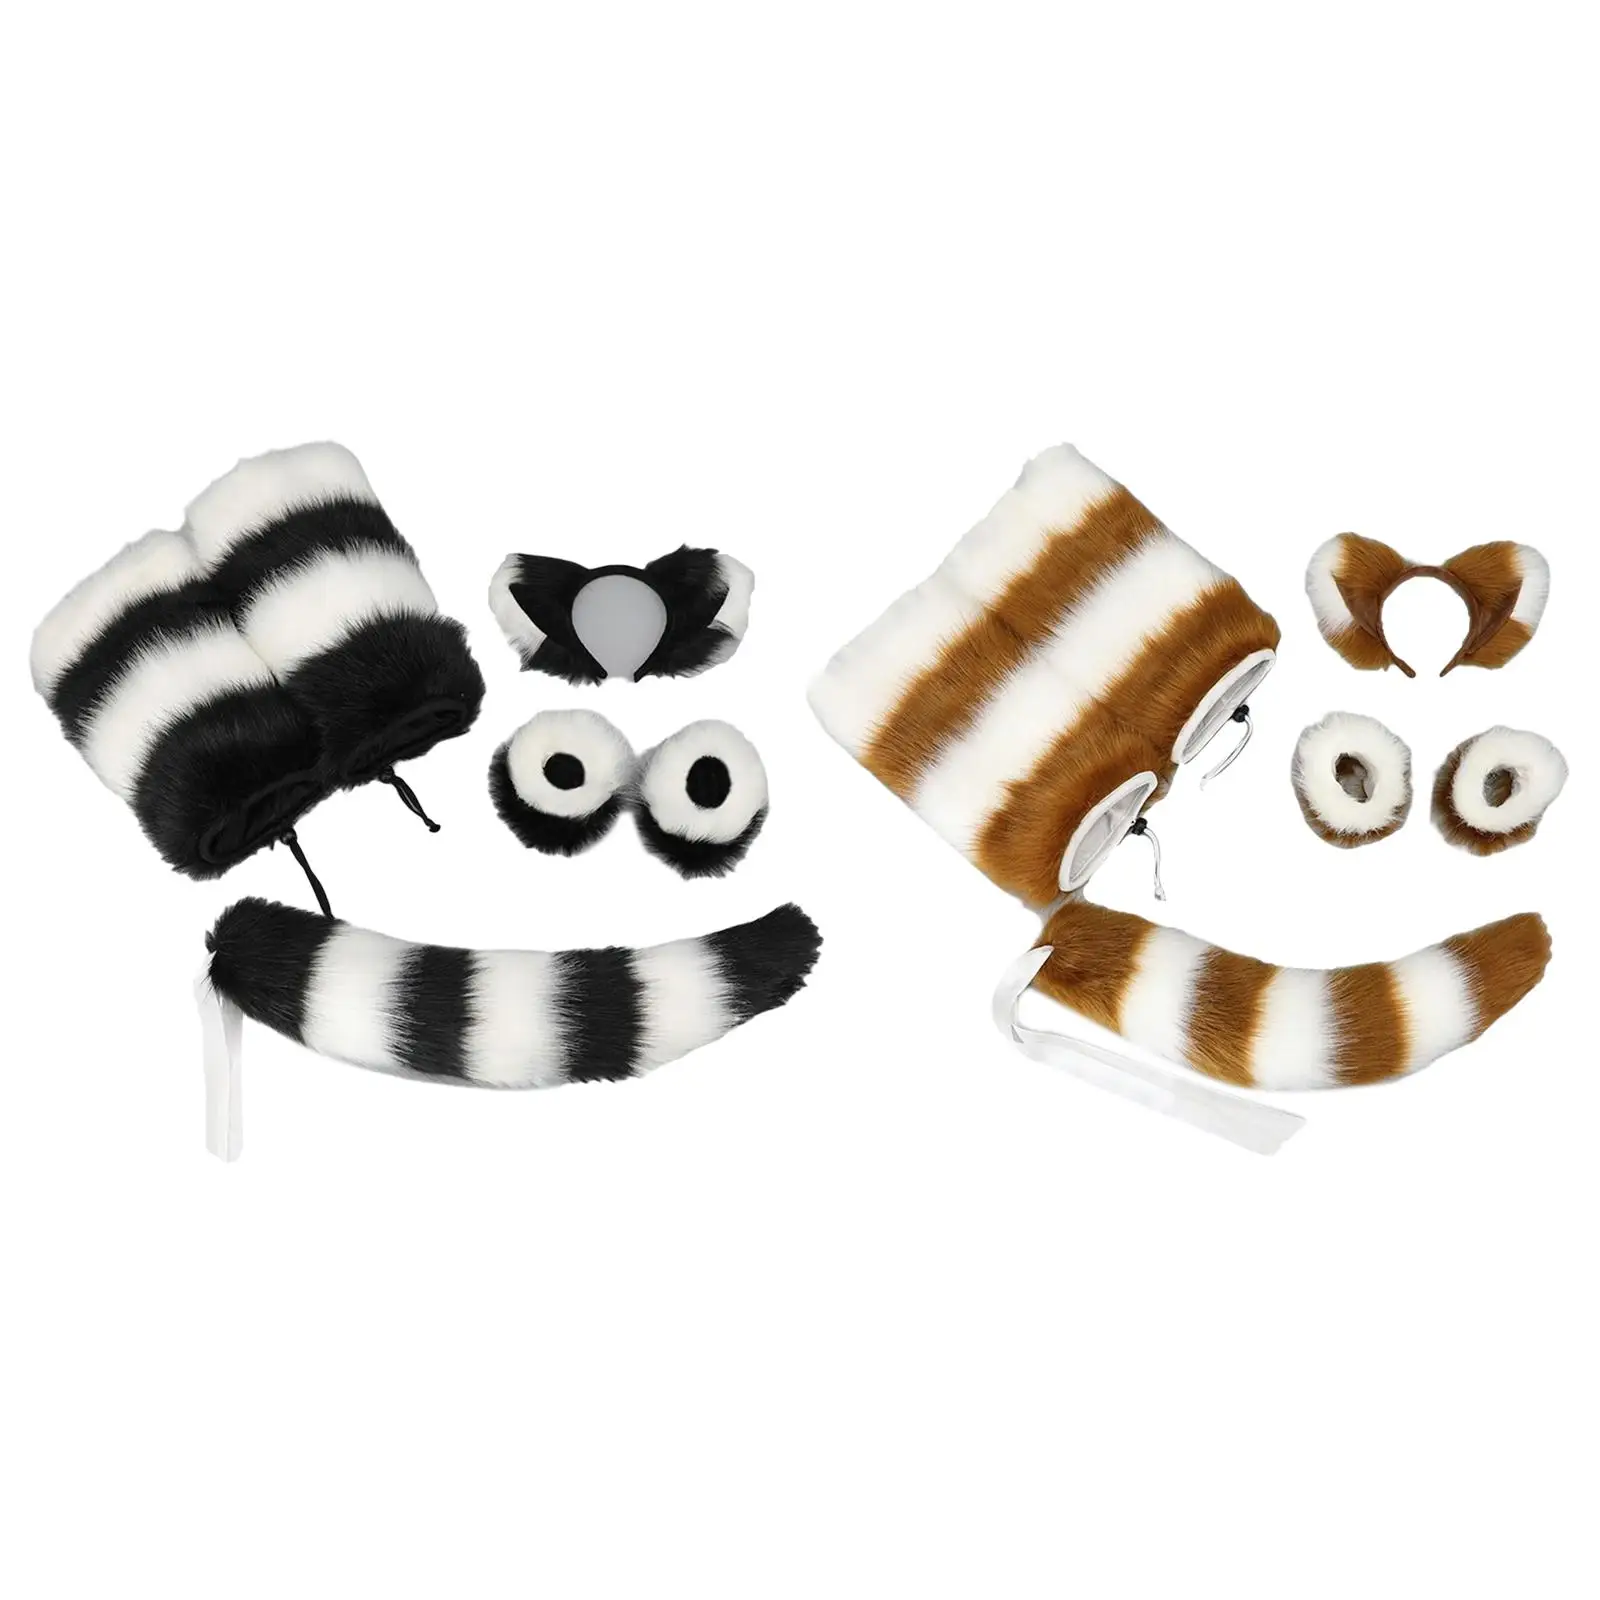 Faux Ears Tail Cosplay Set Headwear Furry Plush Accessories Leg Sleeve for Fancy Party Halloween Costume Adults Children